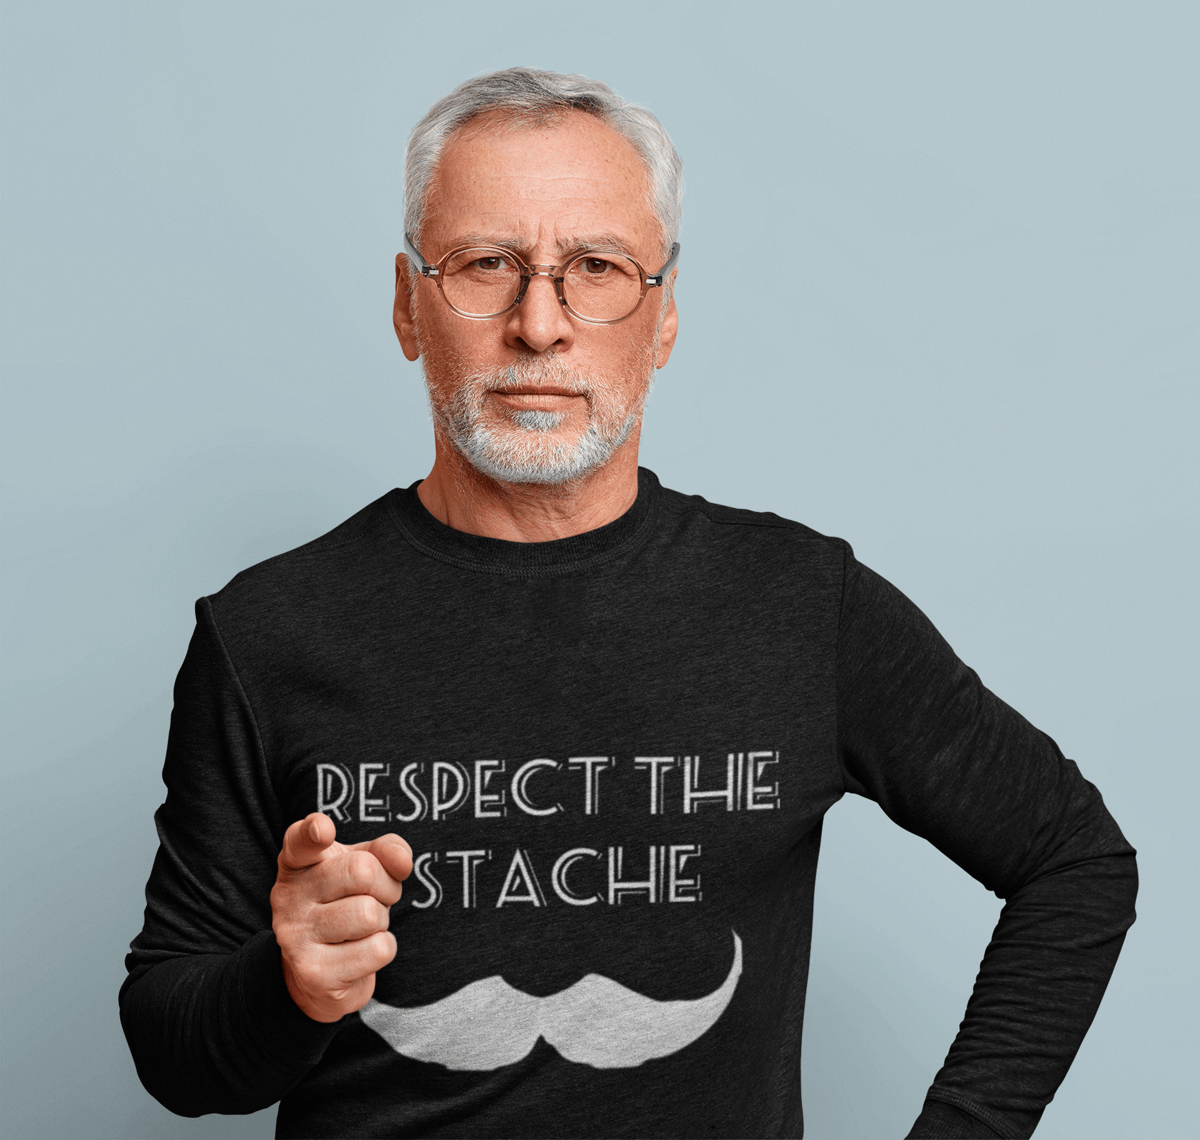 long-sleeve-t-shirt-mockup-of-an-elderly-man-with-glasses-pointing-his-finger-m3560-r-el2